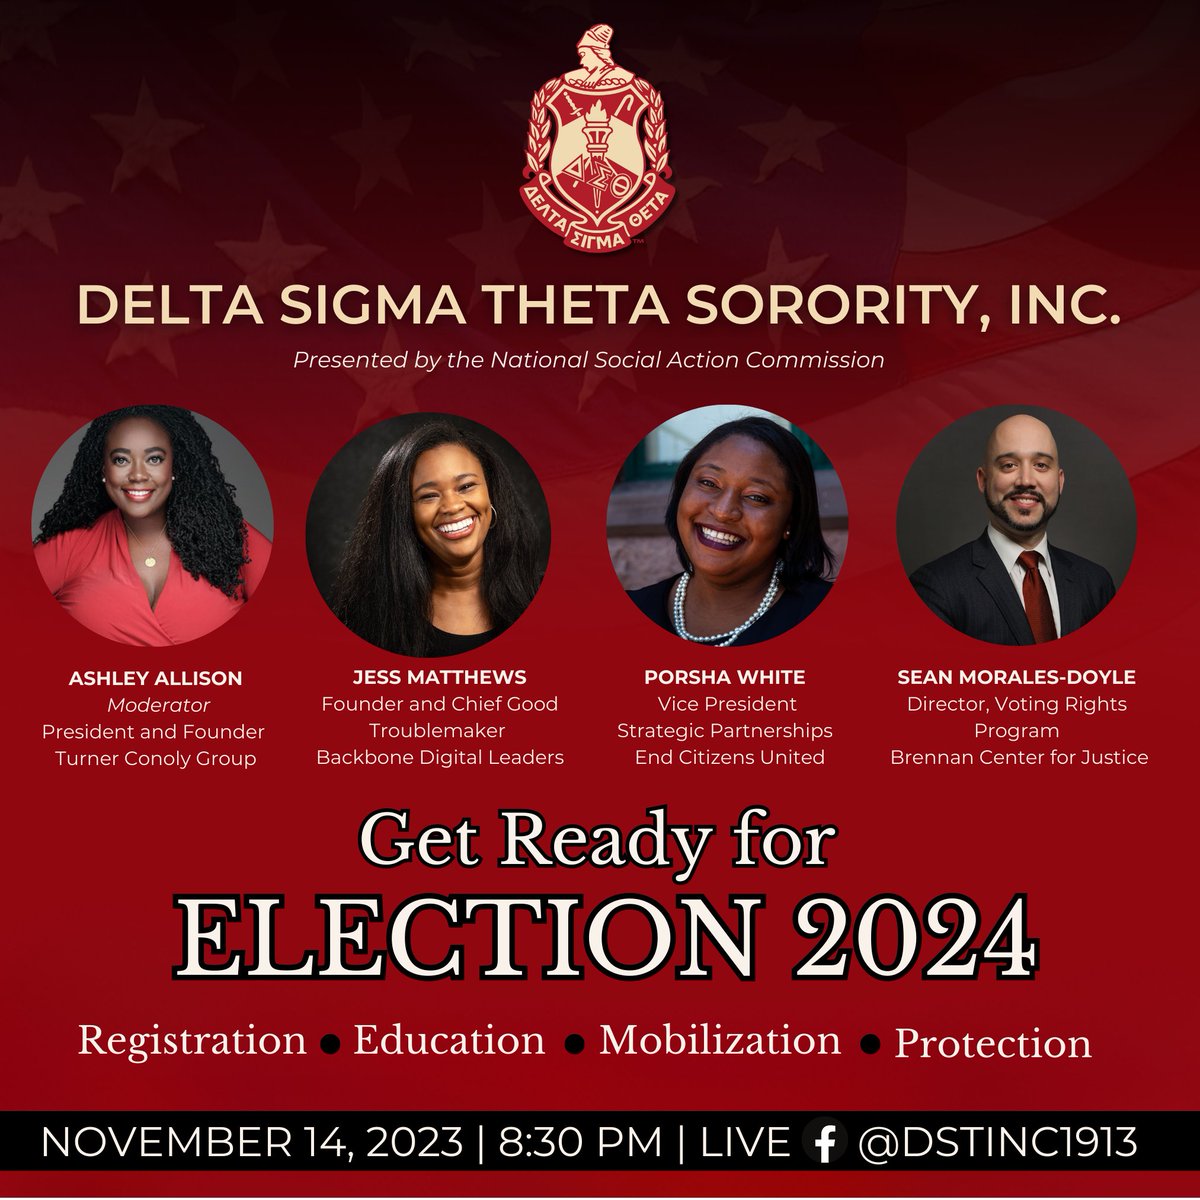 Join the National Social Action Commission TODAY, November 14, 2023 at 8:30 PM ET for our first discussion about how individuals, chapters, and organizations can get ready for the November 2024 election. Watch LIVE on Facebook. #DST1913 #DeltasVote #EmpoweringOurCommunities